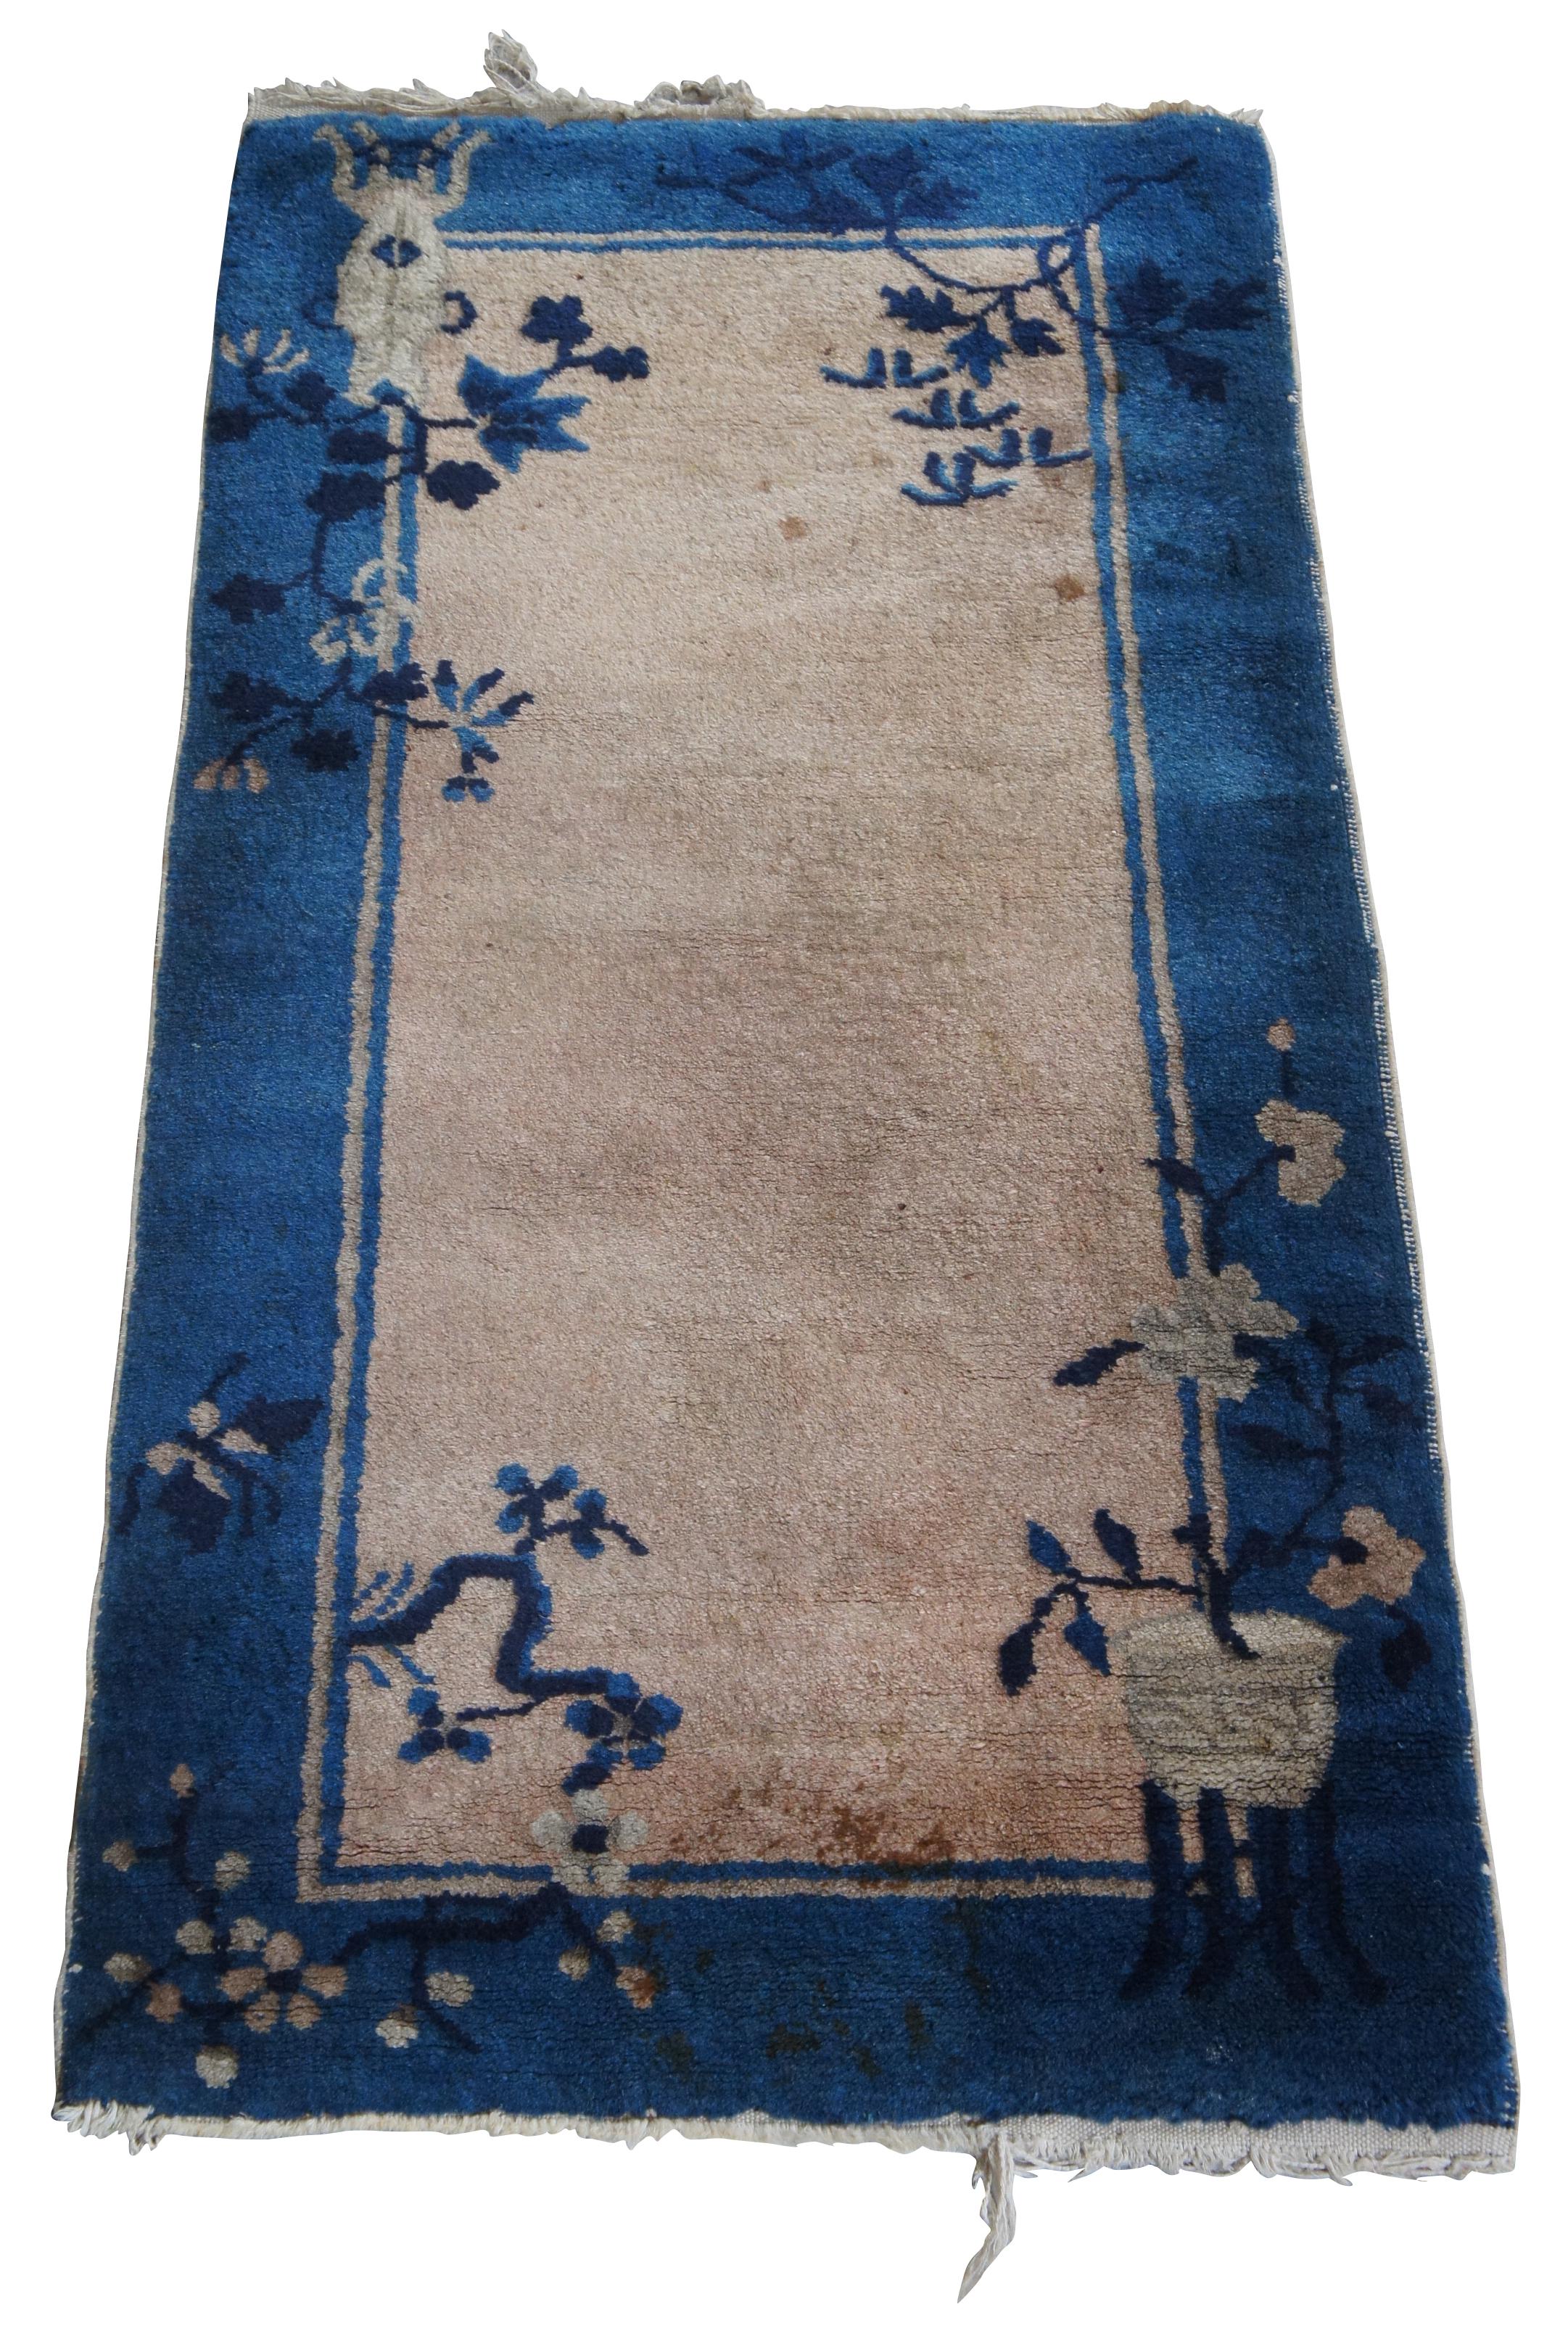 Antique chinese floral rug or carpet featuring flower filled vases on stands against a salmon pink ground with blue boarder.
  